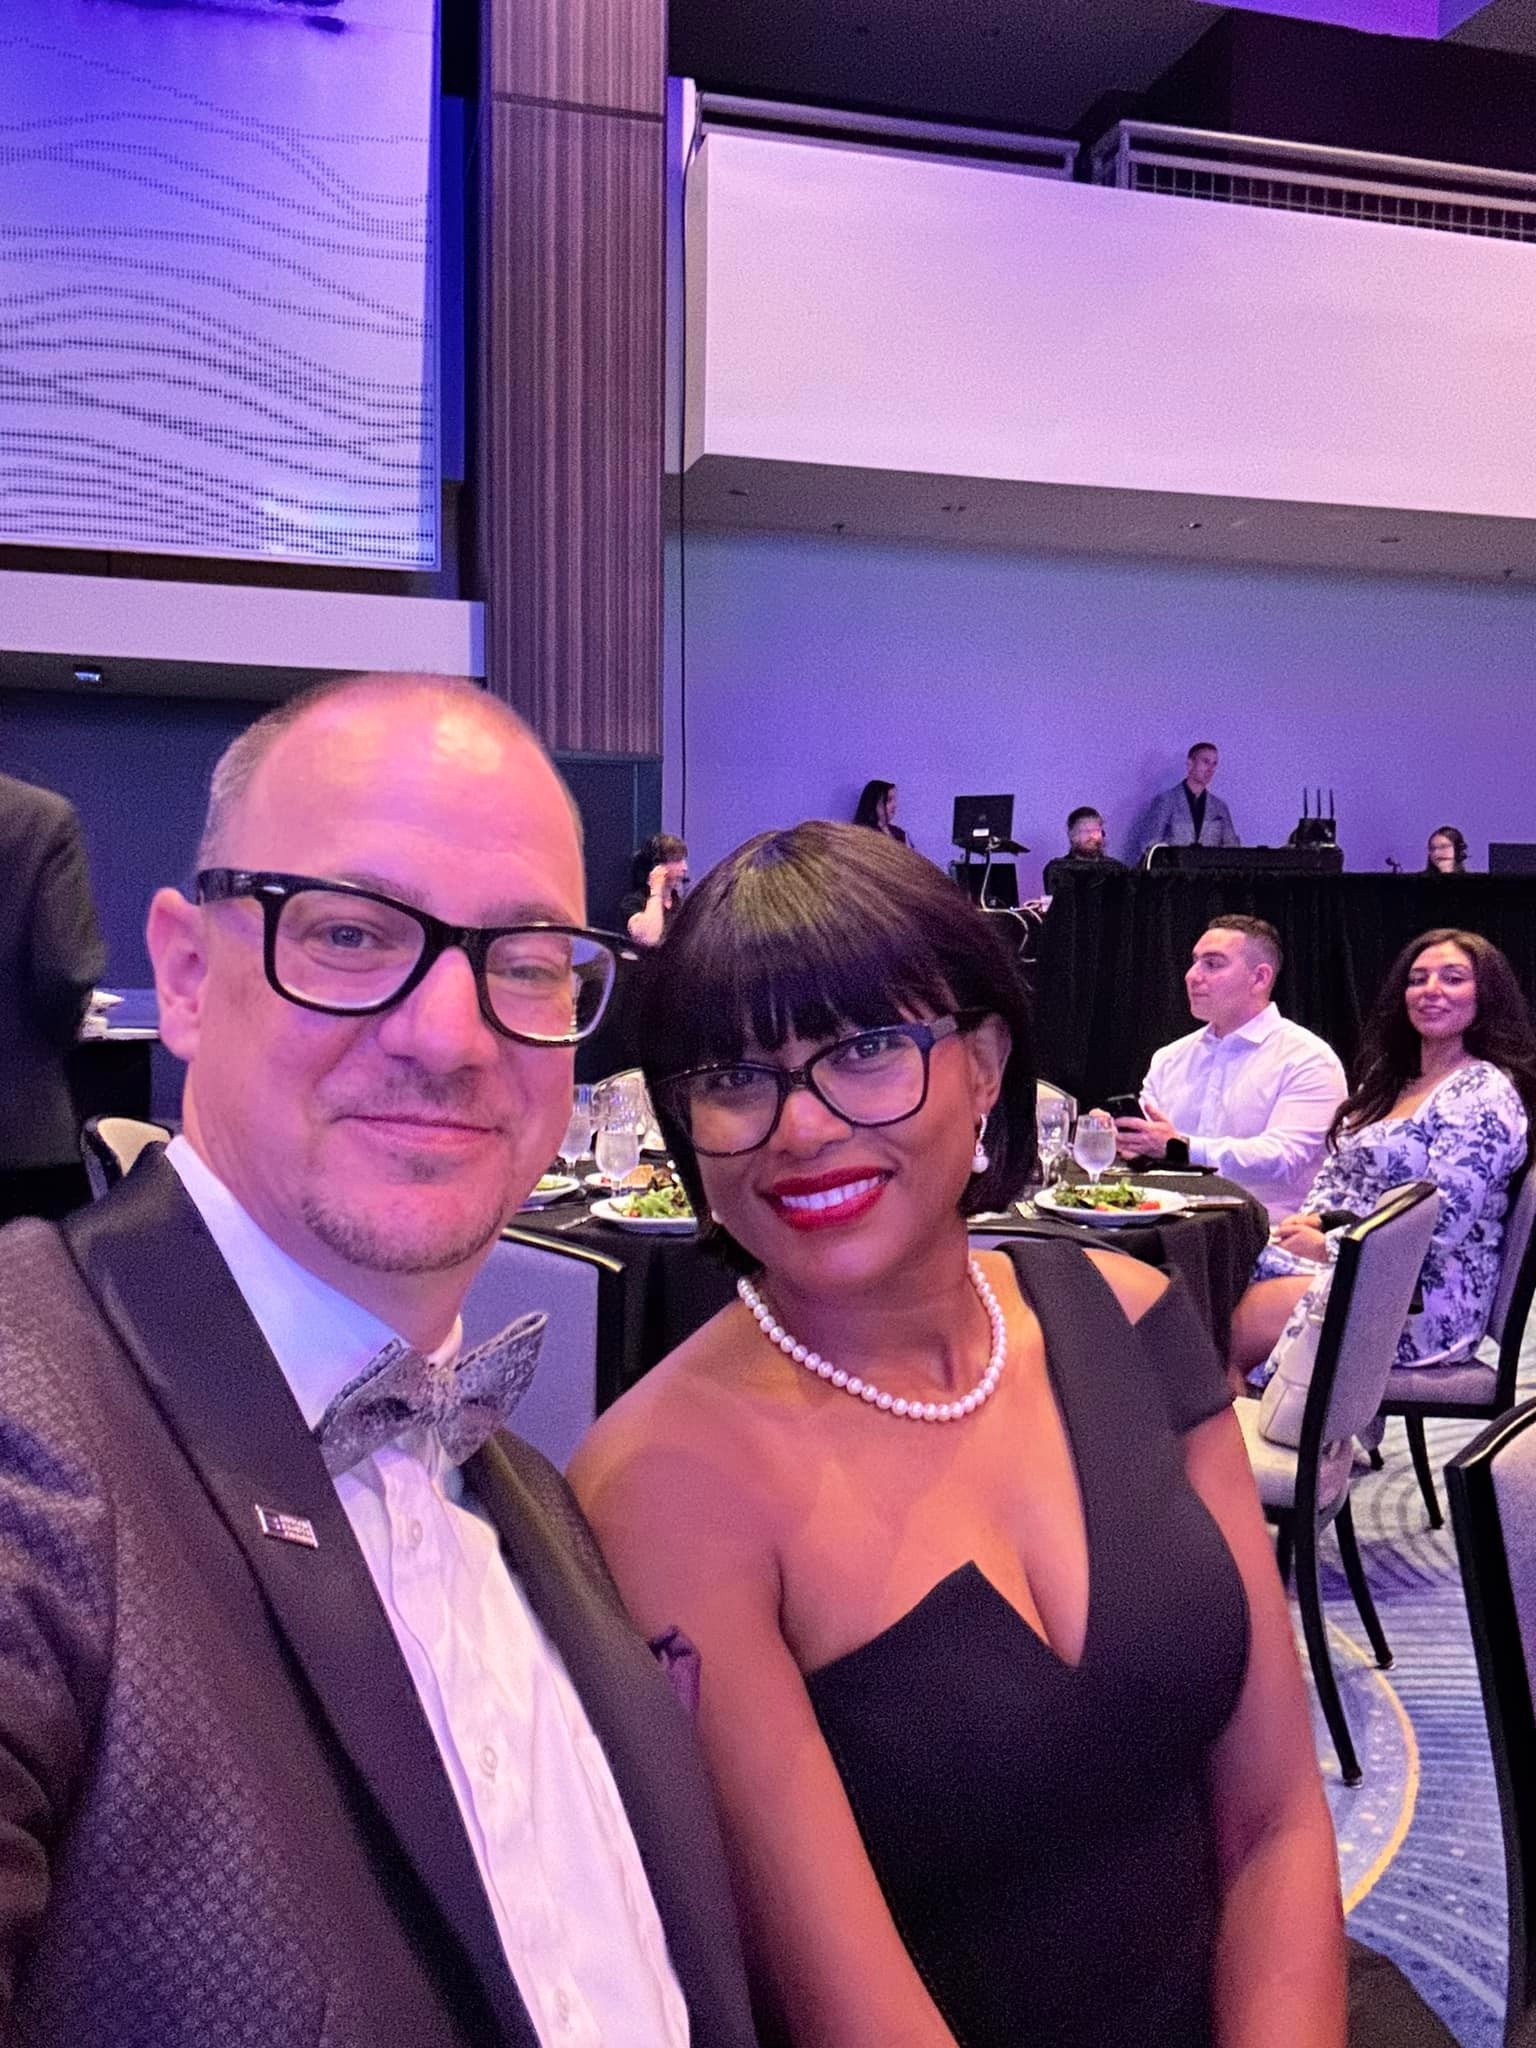 Always enjoy the Atlanta HRC Gala - this year I had the BEST date! 
SLCAs Tom Woodward has been attending and filing tables with guest for 30 years! 
SLCA&rsquo;s commitment to equality is deep! 
#YouBelong 
#SLCA 
#HRC